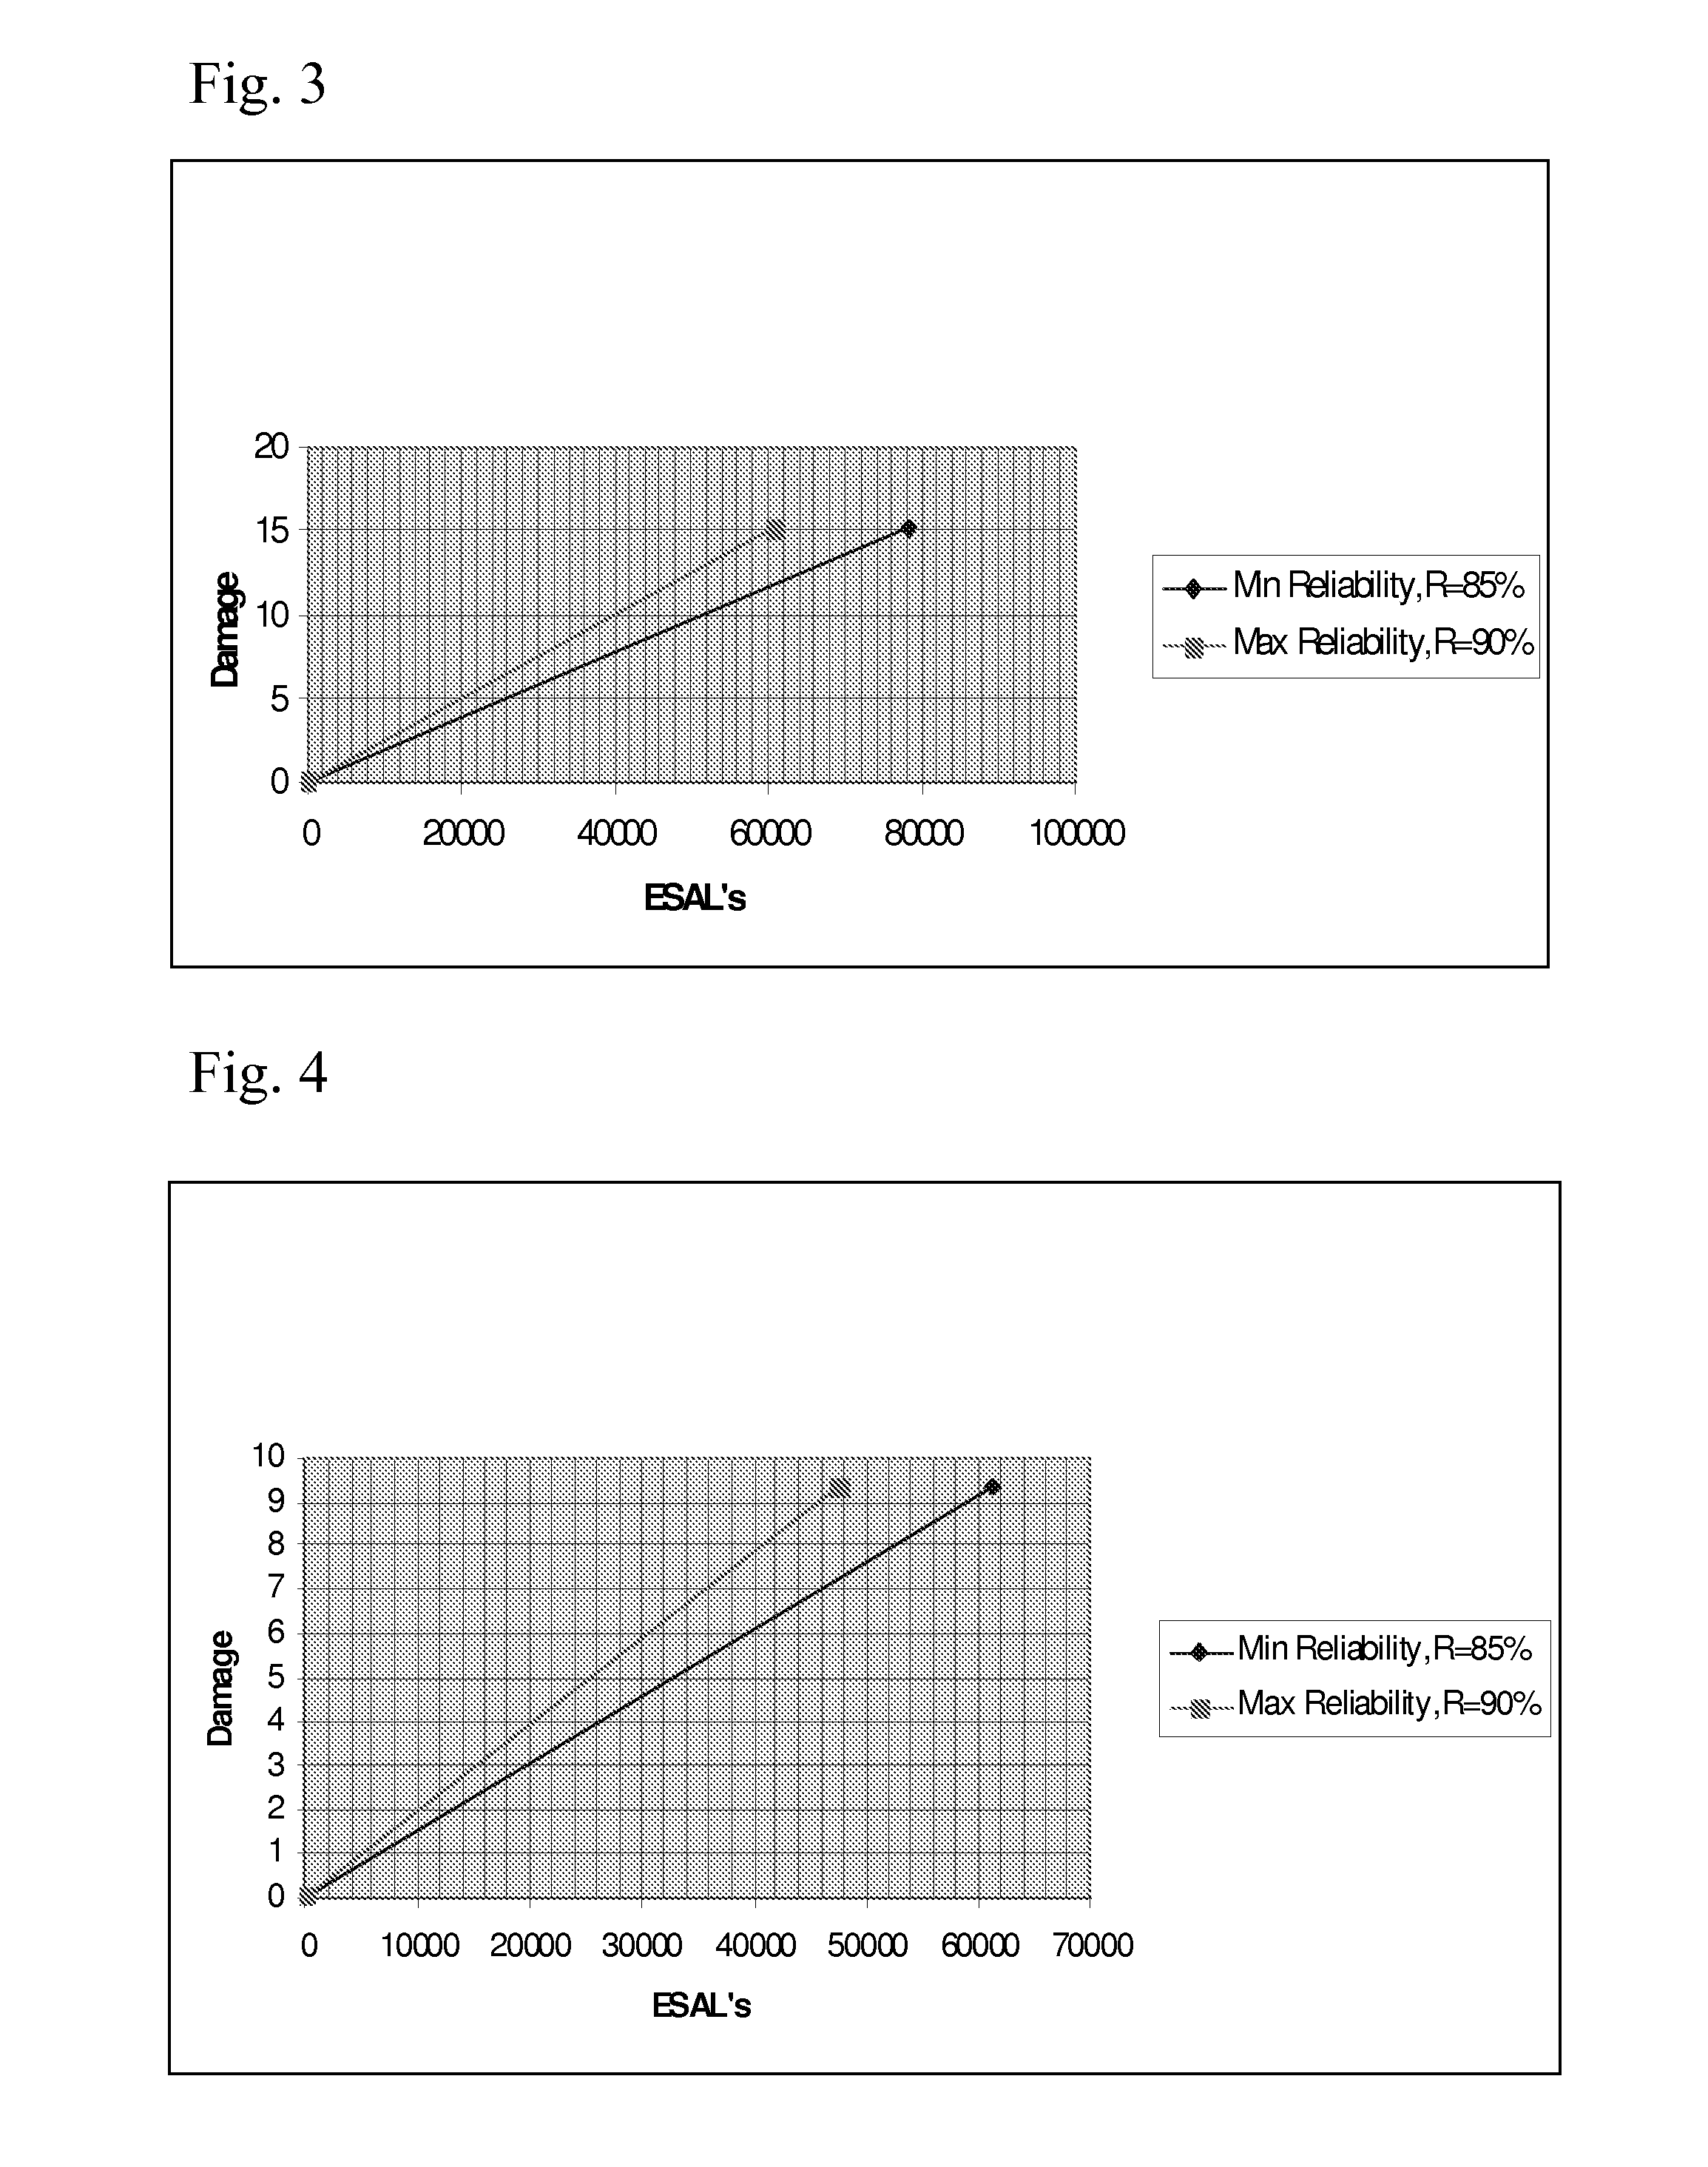 Methods and Processes of Road Use Evaluation and Regulation